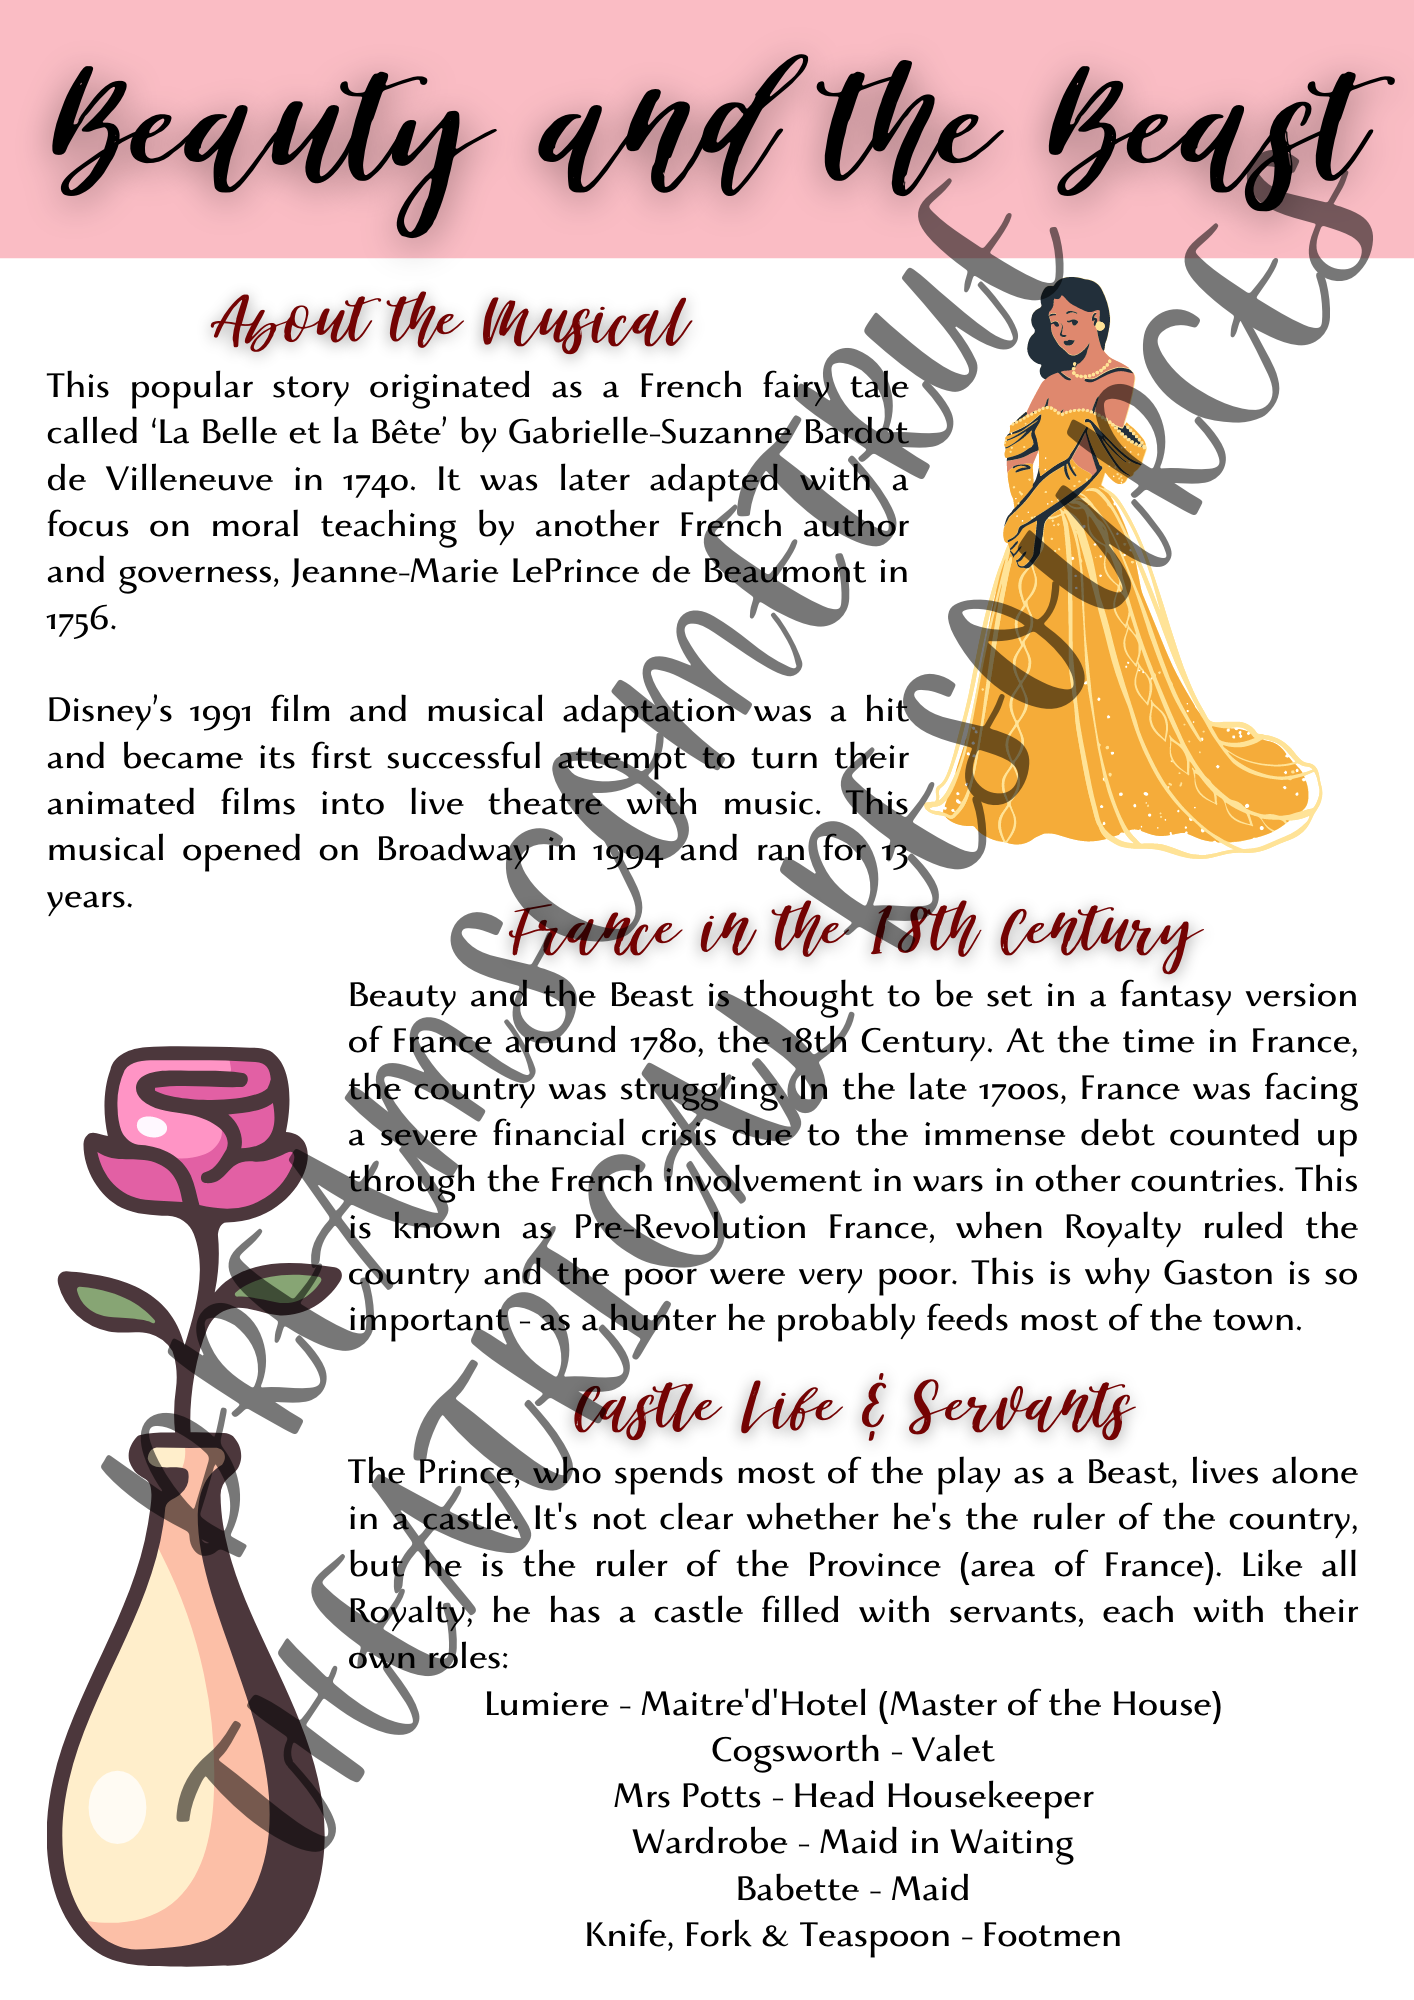 Infographic about 'Beauty and the Beast' musical history.